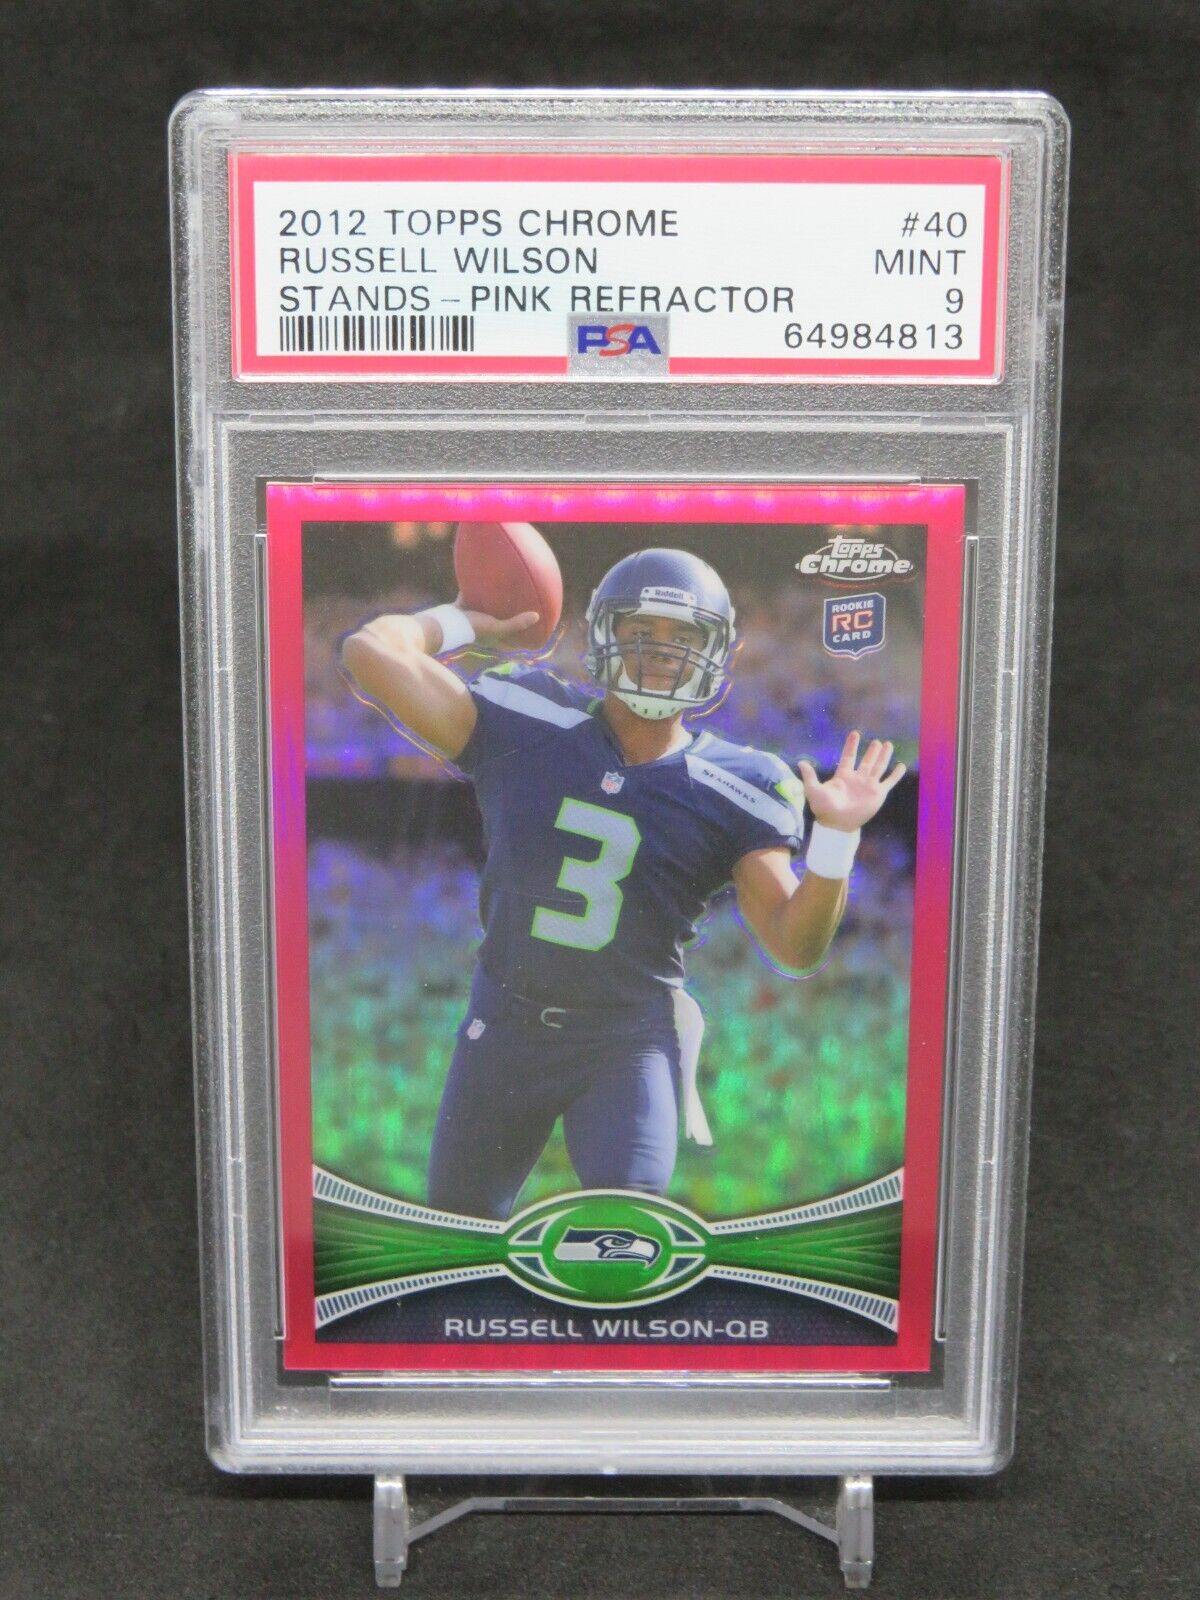 2012 TOPPS CHROME RUSSELL WILSON STANDS PINK REFRACTOR RC /399 PSA 9 SEAHAWKS KV